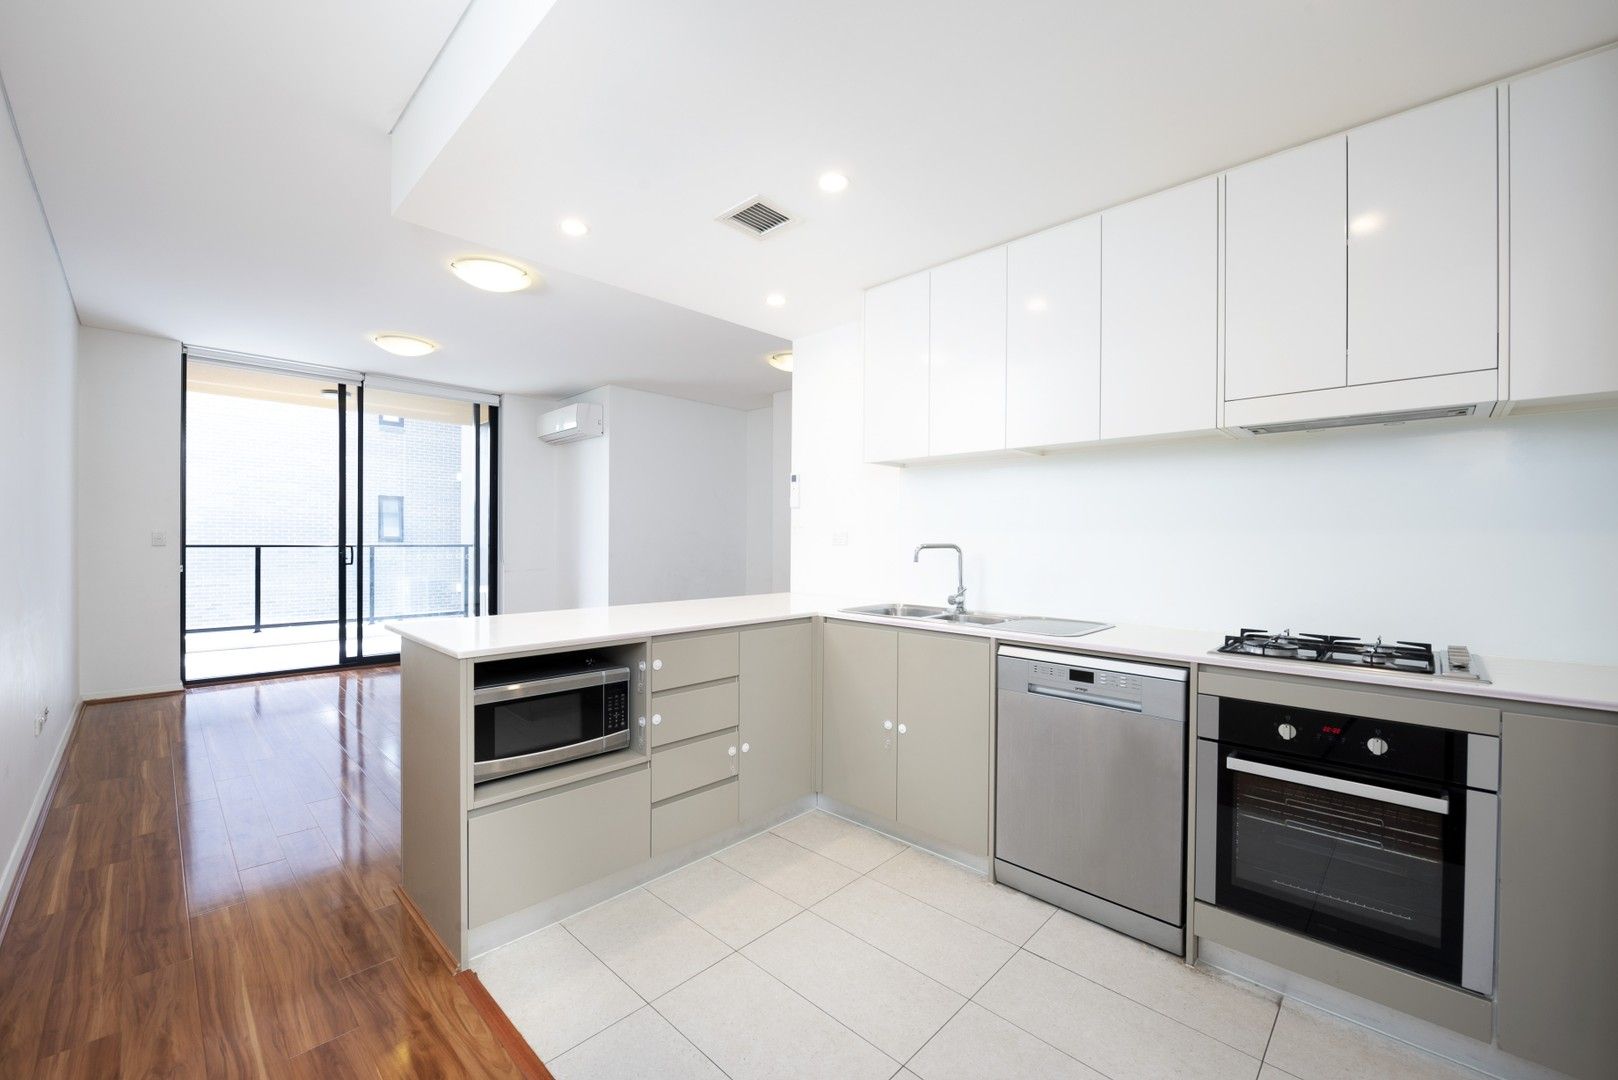 2 bedrooms Apartment / Unit / Flat in 5021/74 Belmore Street RYDE NSW, 2112